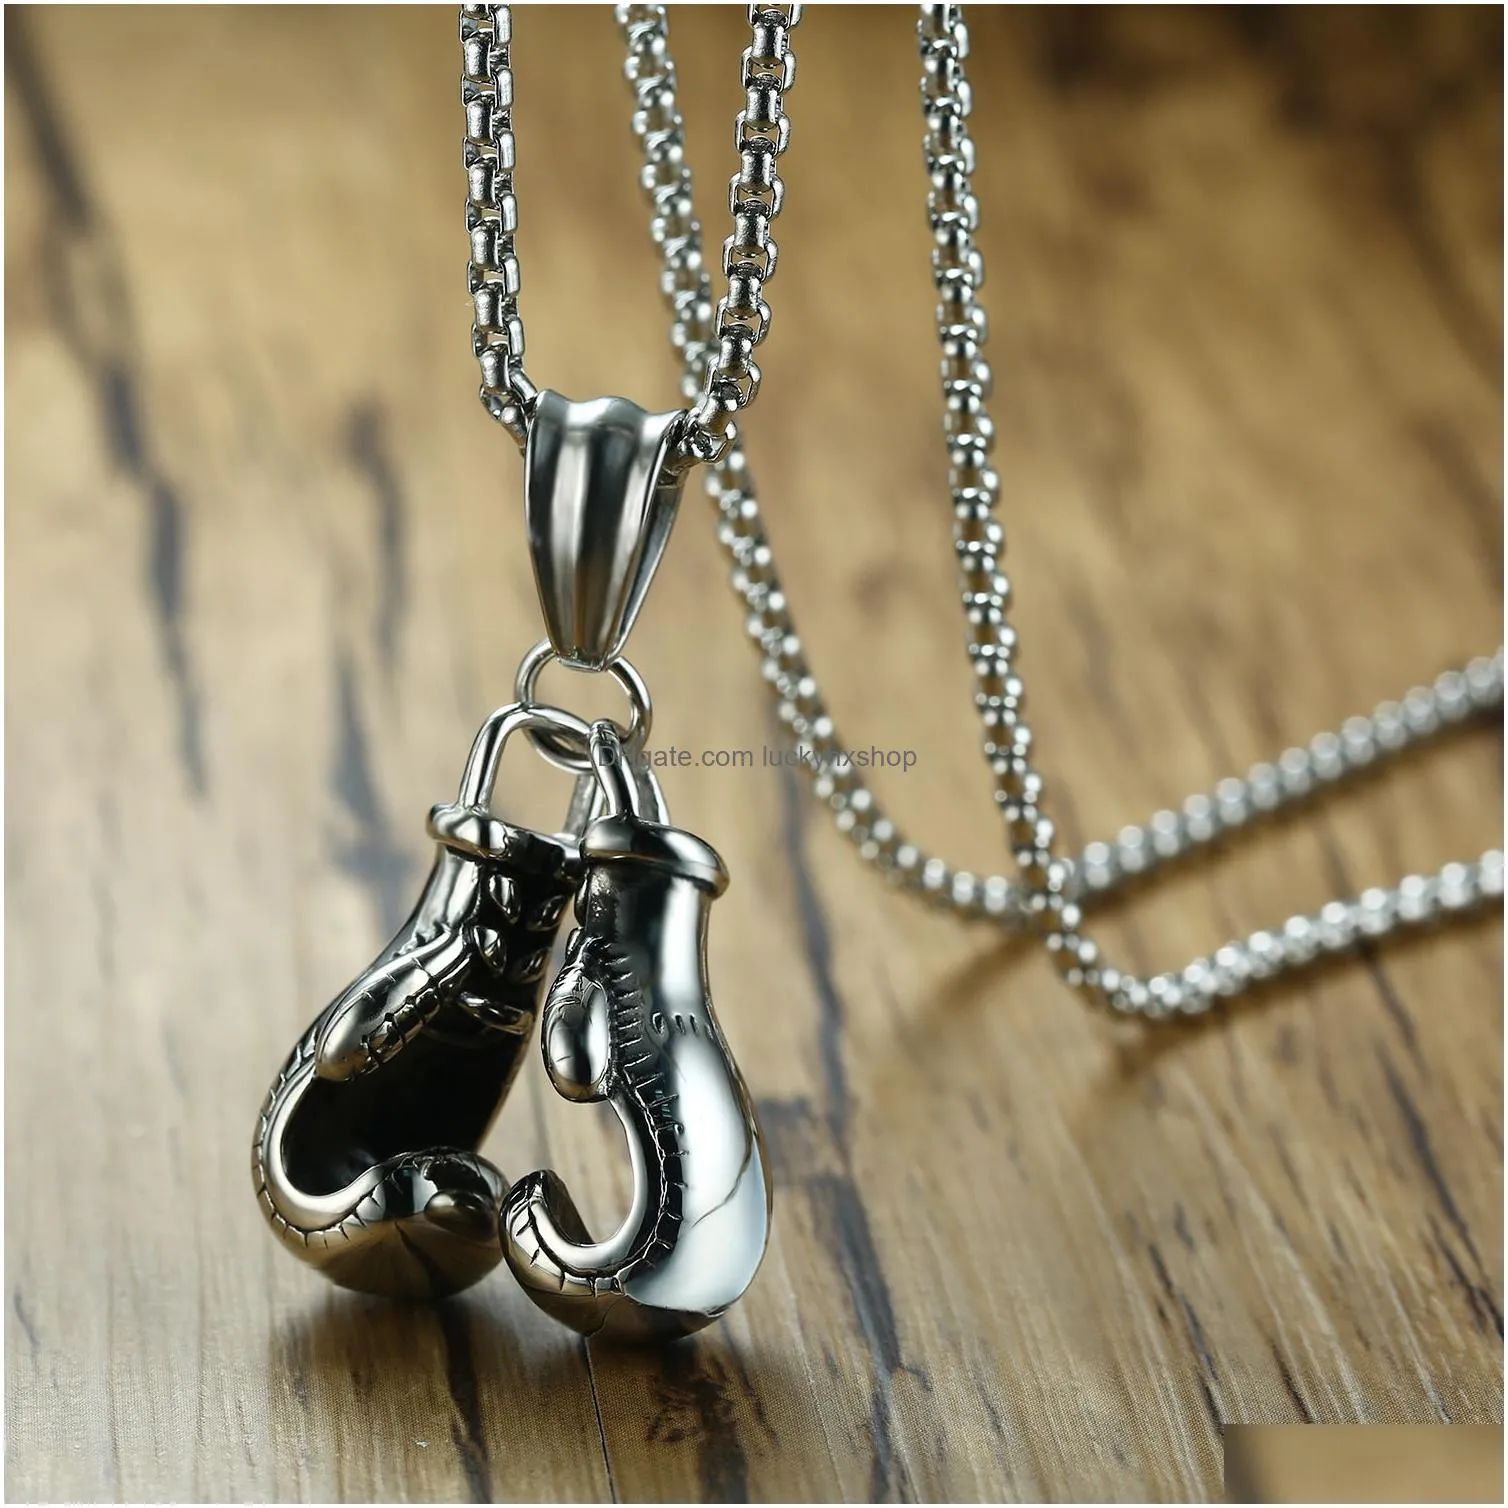 Pendant Necklaces Stainless Steel Boxing Gloves Pendant Necklace For Men Individuality Fitness Sports Chains Hip Hop Jewelry Gift Drop Dhdh9